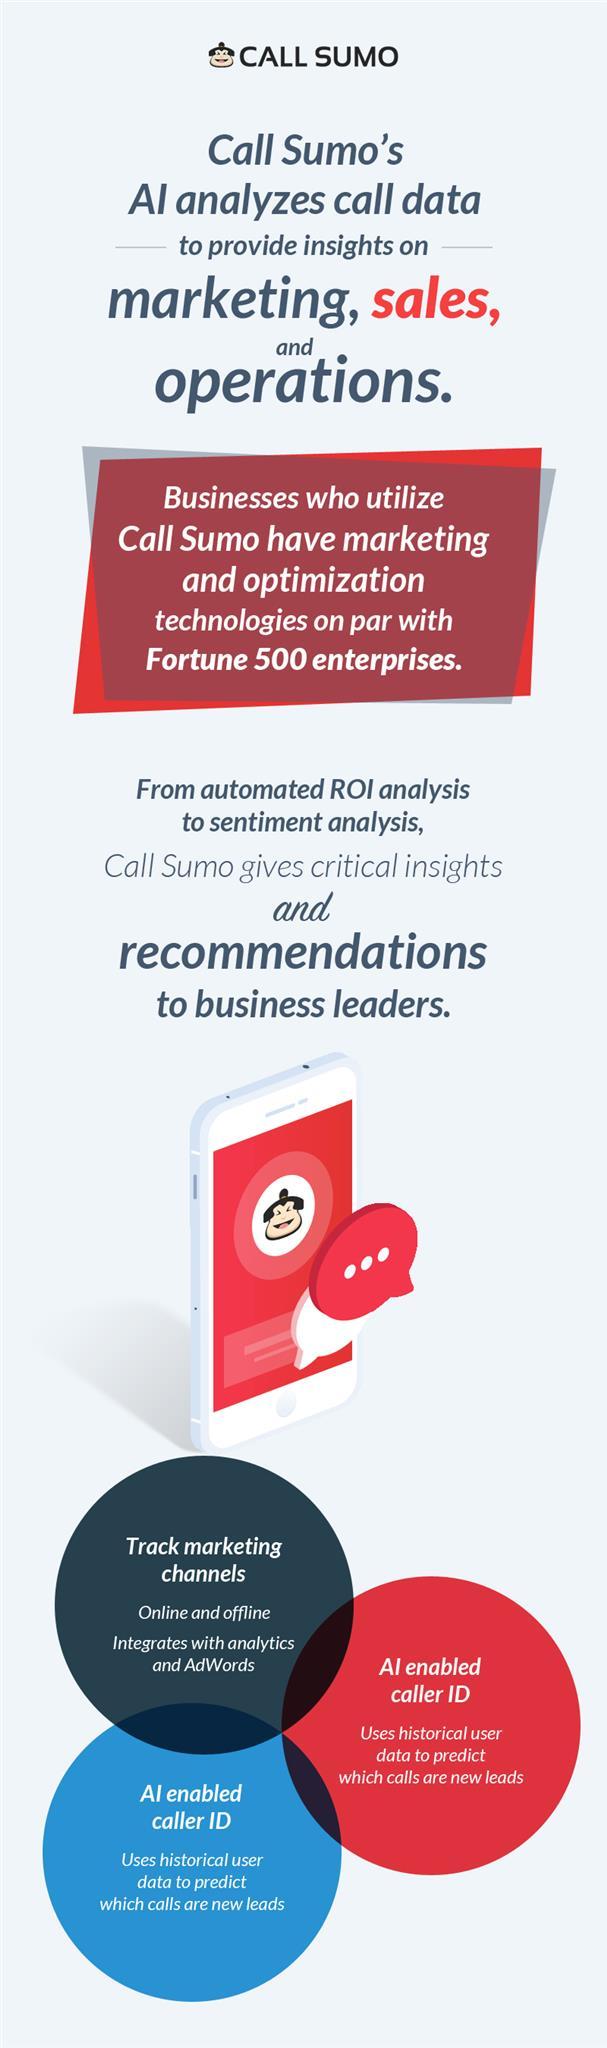 Get Better Insights on Marketing, Sales, and Operations with Call Sumo’s AI